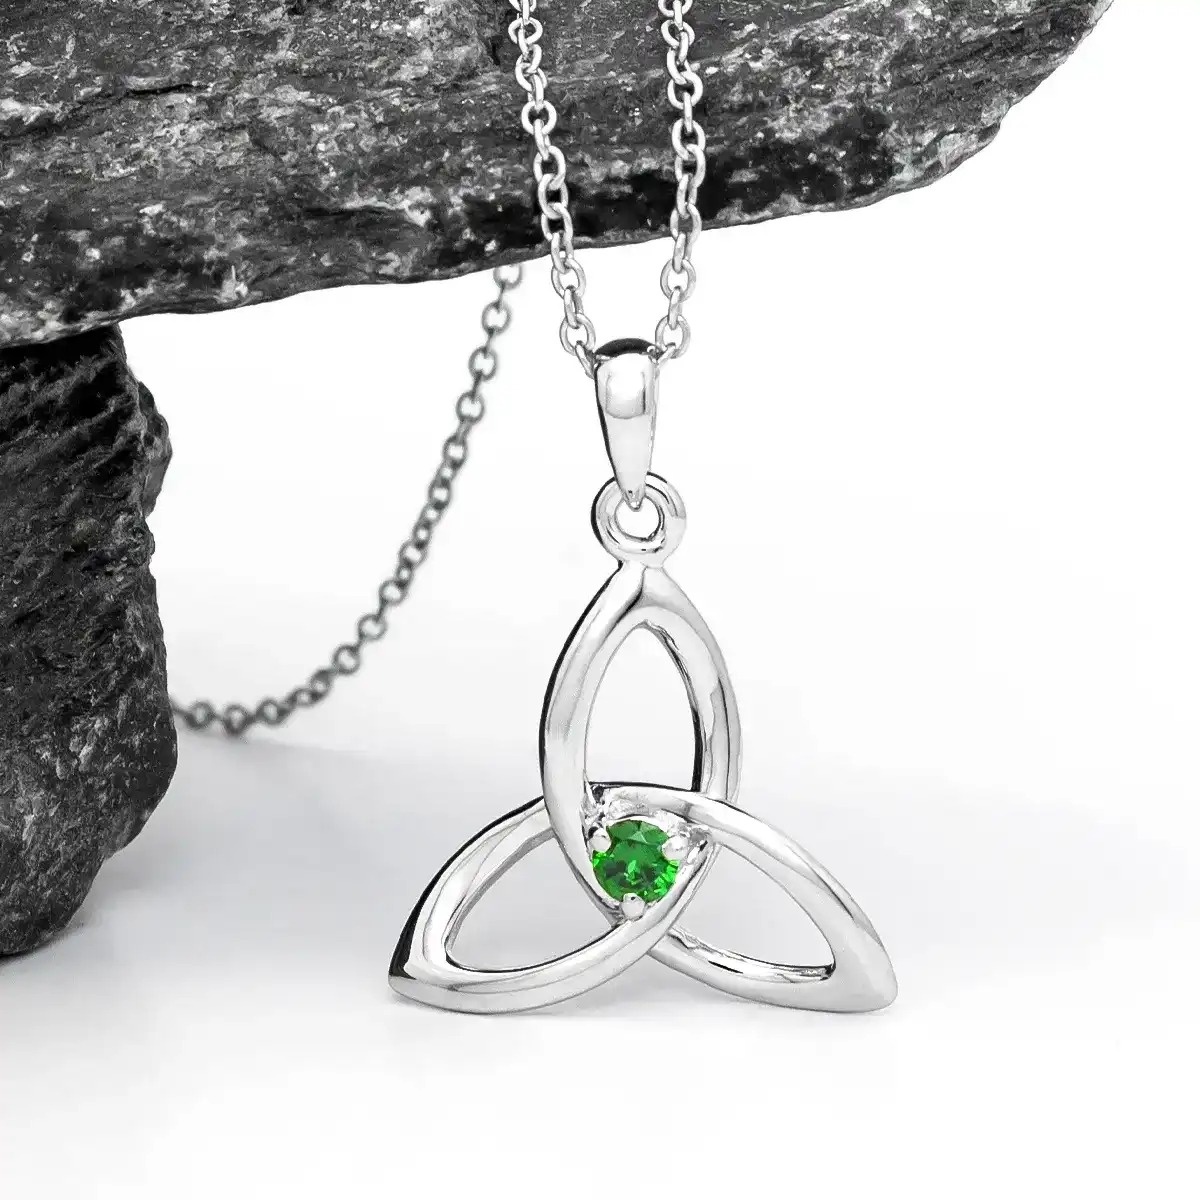 Silver Trinity Knot Necklace with Green Stone...